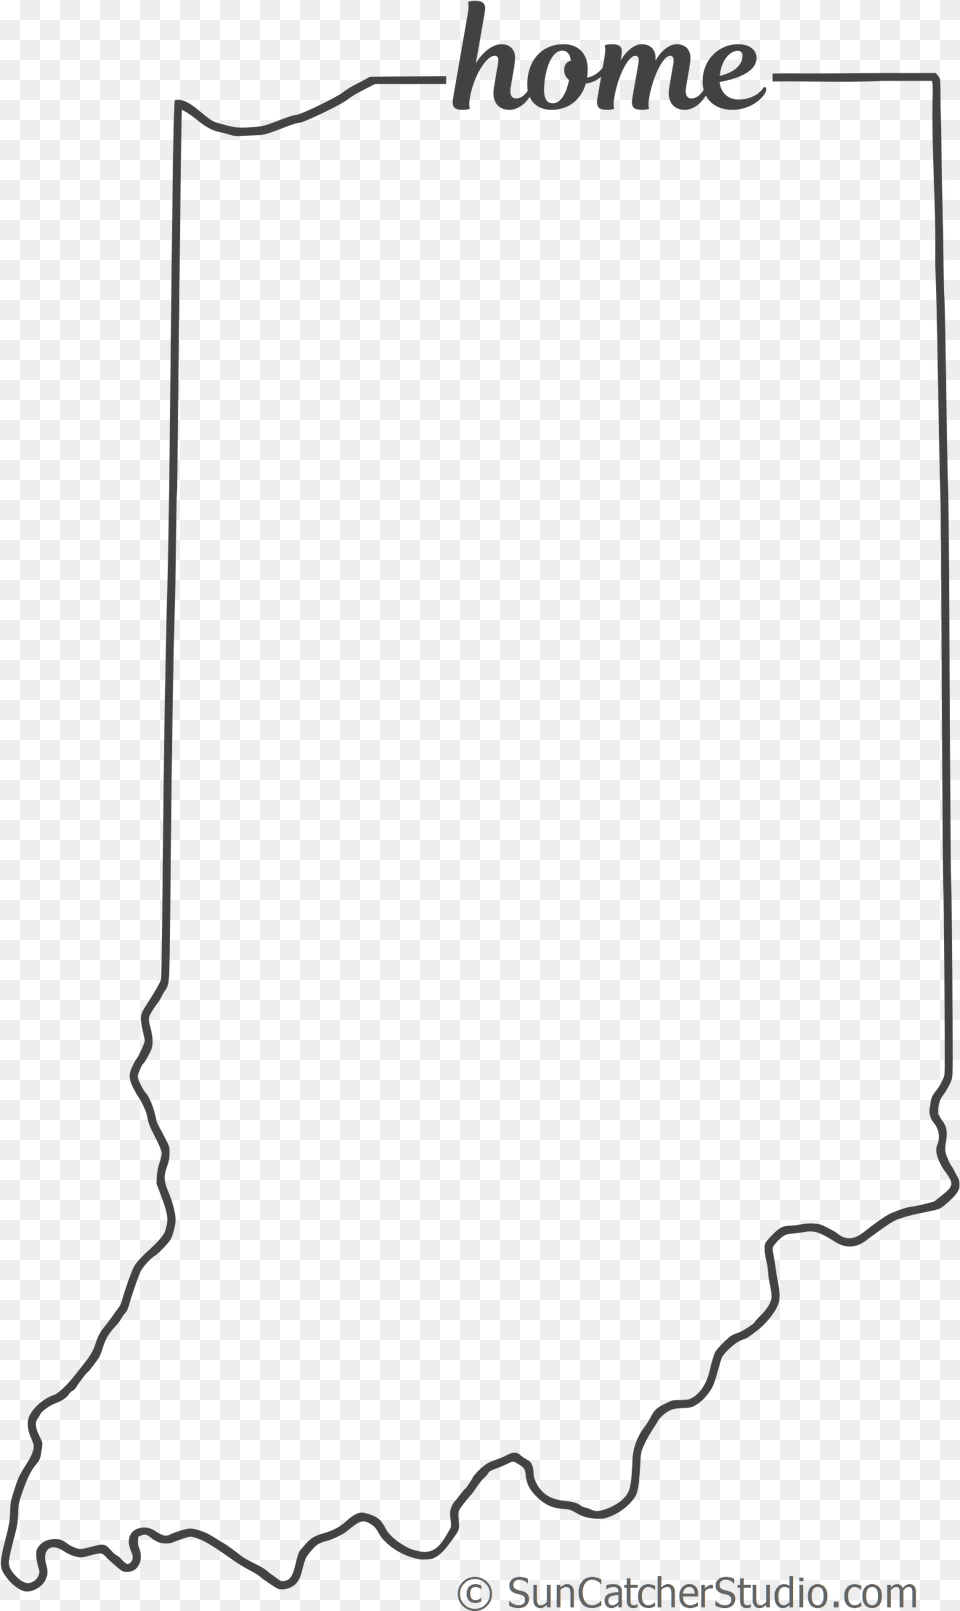 Indiana Outline With Home On Border Cricut Or Line Art, Text, Blackboard Png Image